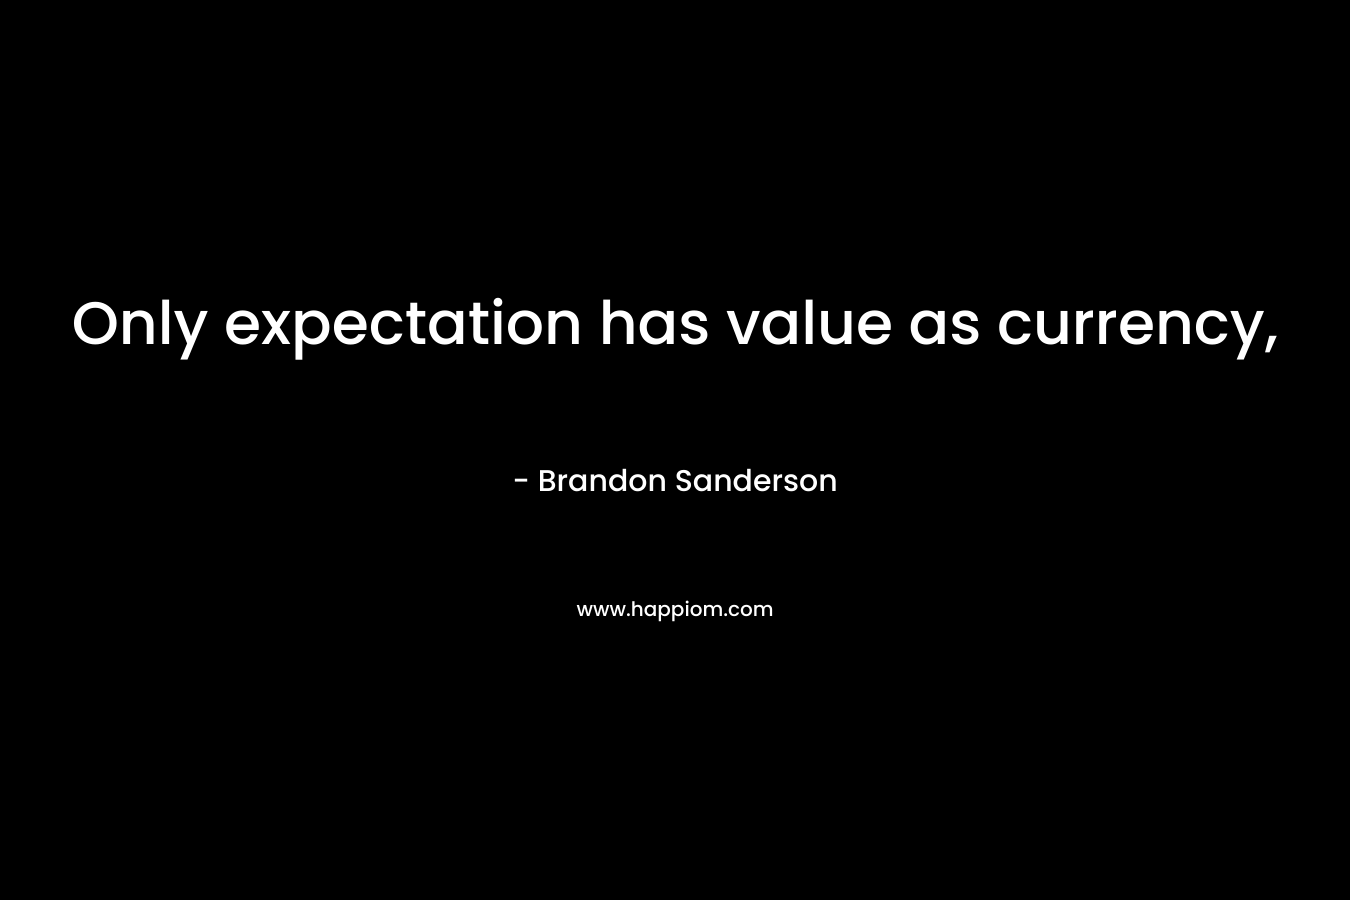 Only expectation has value as currency,